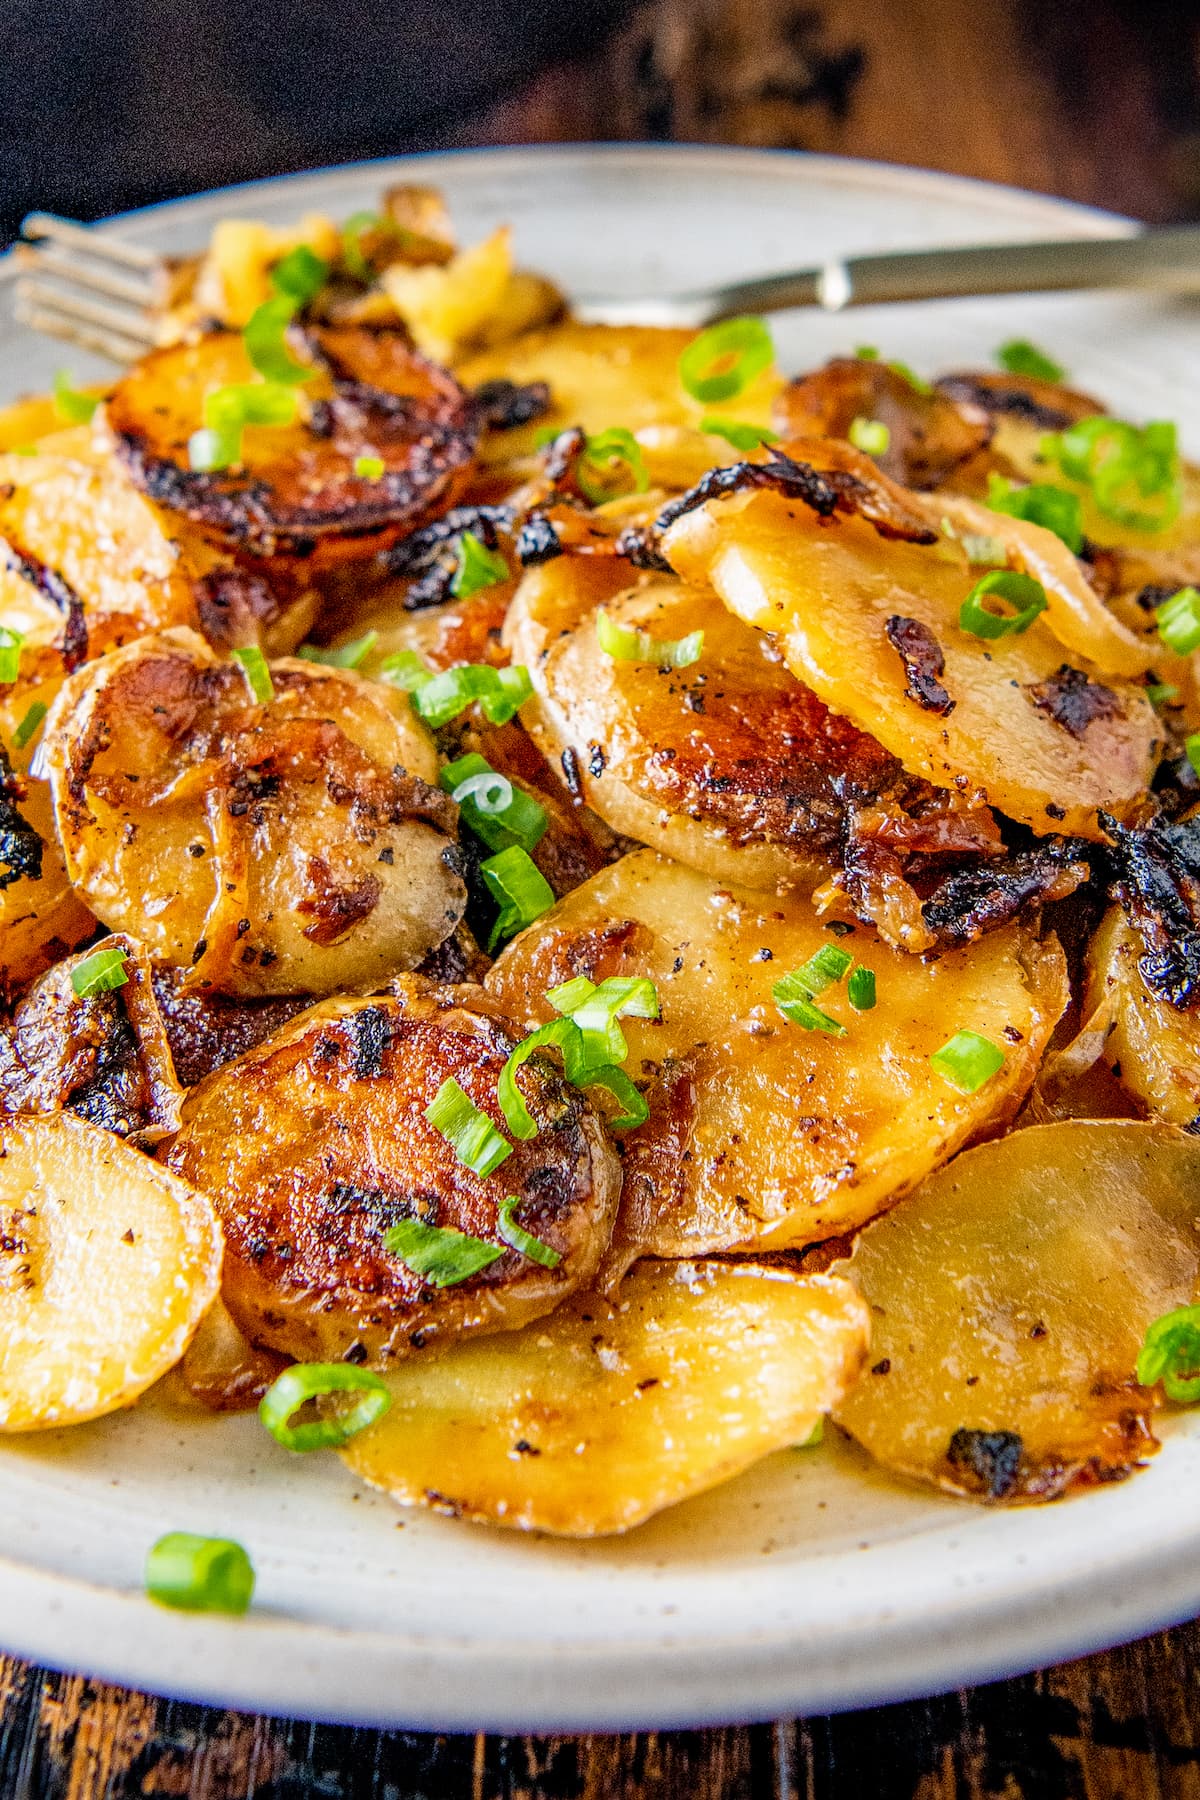 a plate of fried sliced potatoes and onions garnished with chives